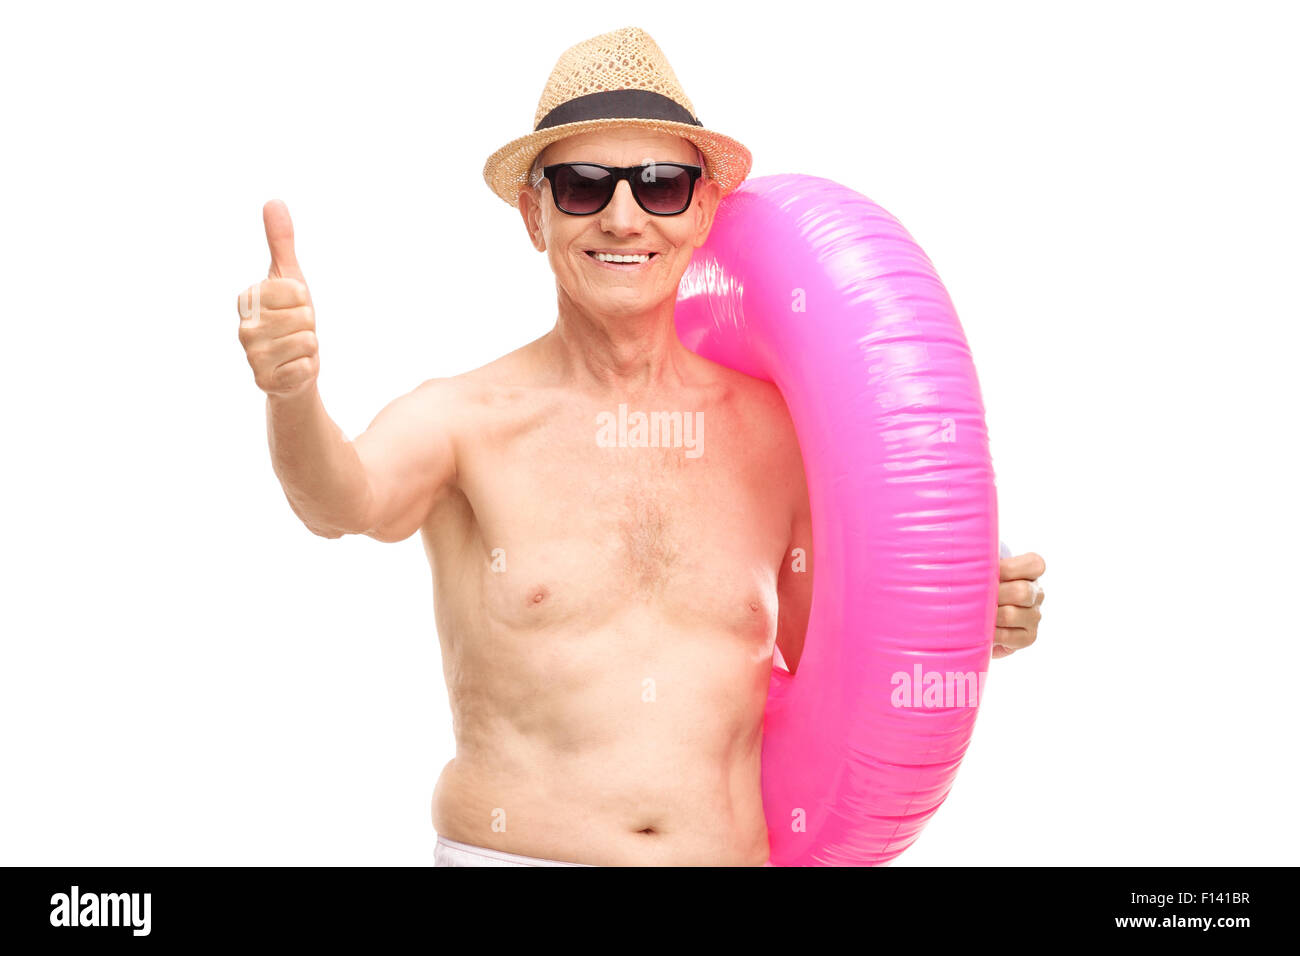 Senior man carrying a big pink swimming ring and giving a thumb up isolated on white Stock Photo